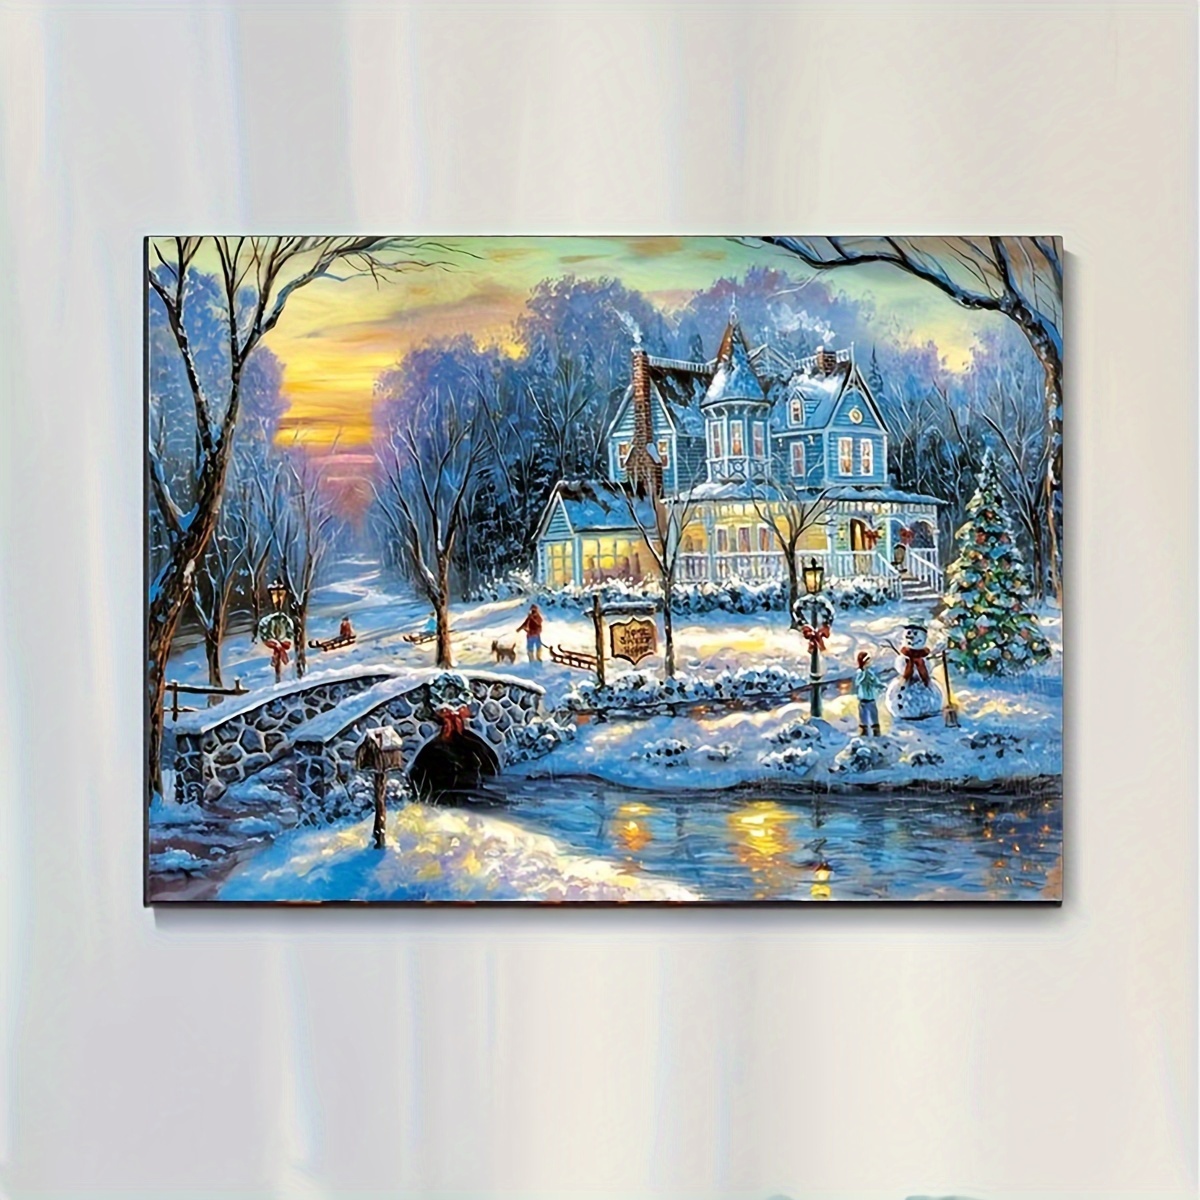 

Snow Scenery Diamond Painting Tools For Adults And 5 D Diy Diamond Art Tools For Beginners With Round Full Drill Diamond Gems Painting Art Decor Gifts For Home Wall